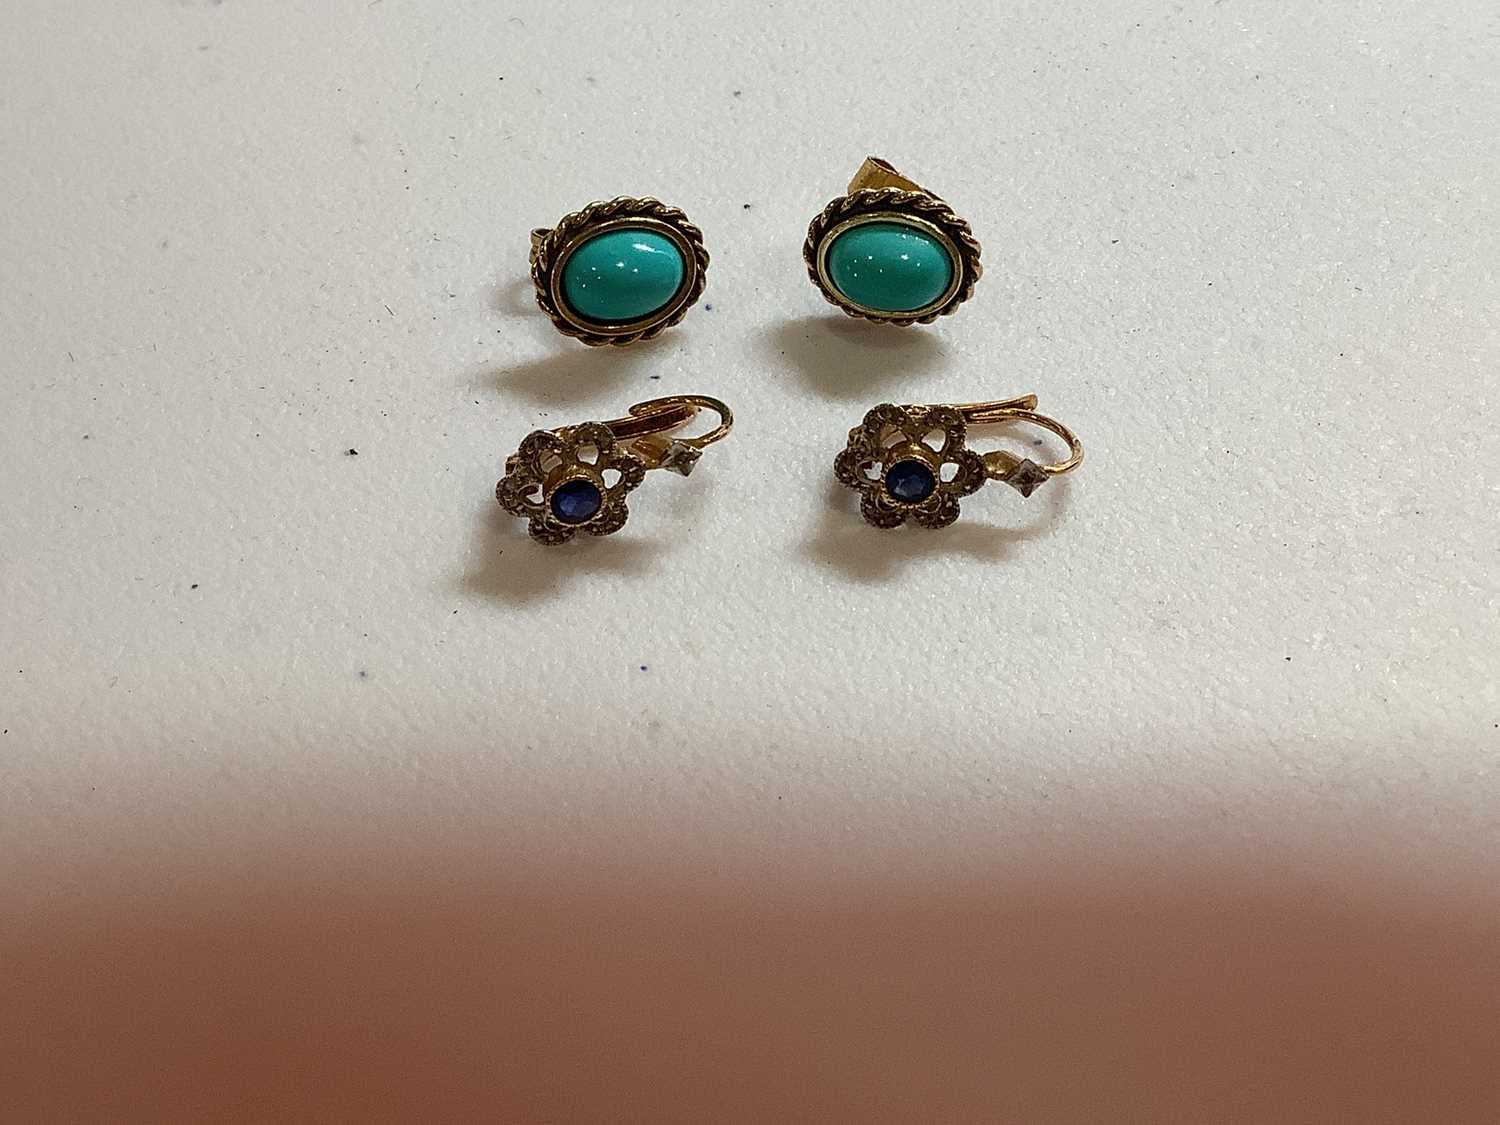 Eight pairs of gold and gemstone earrings for pierced ears. - Image 3 of 4